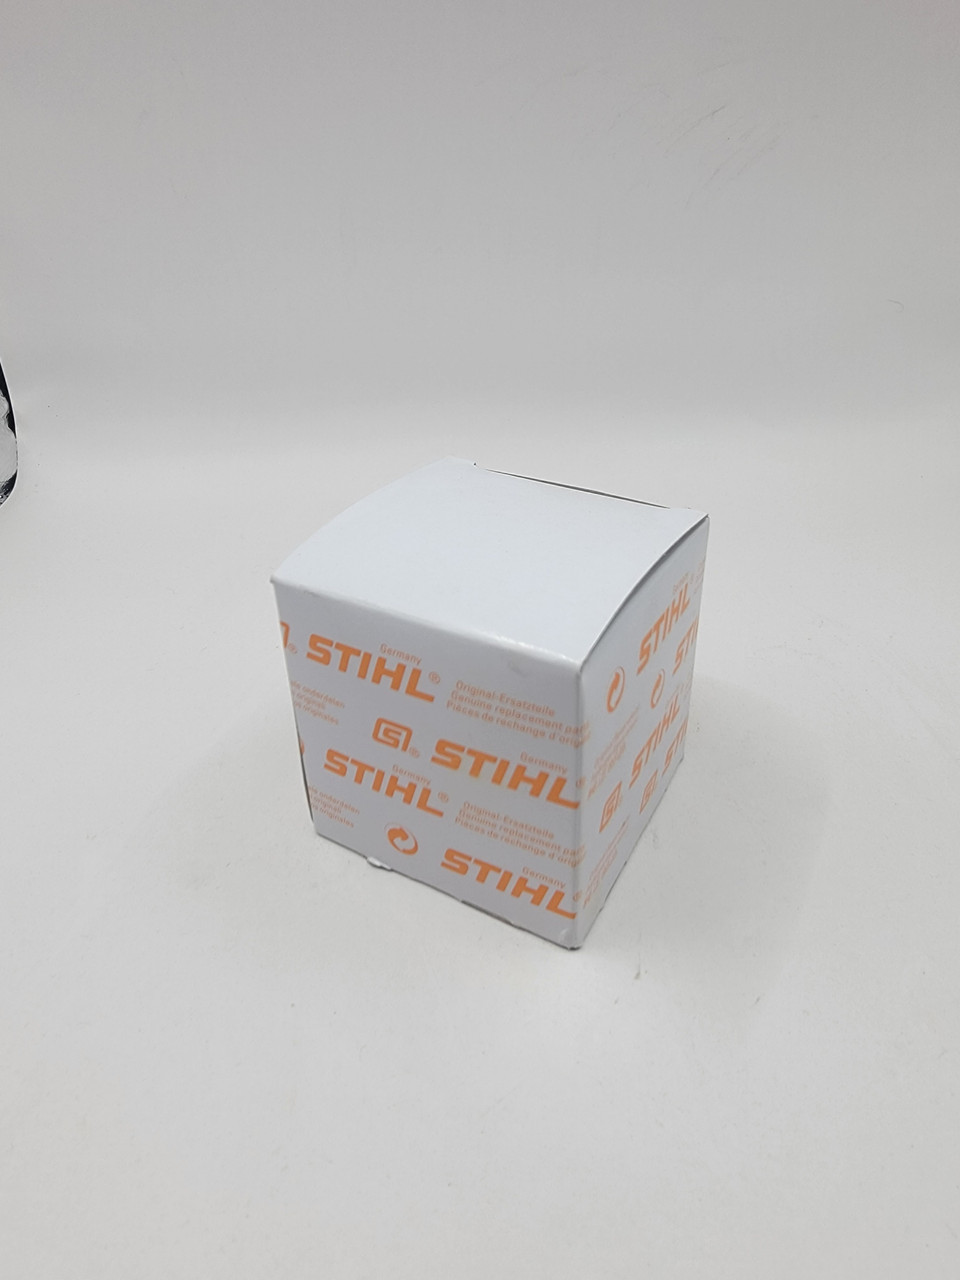 Stihl 0458 357 0121 OWNERS MANUAL FS 88/108 one package